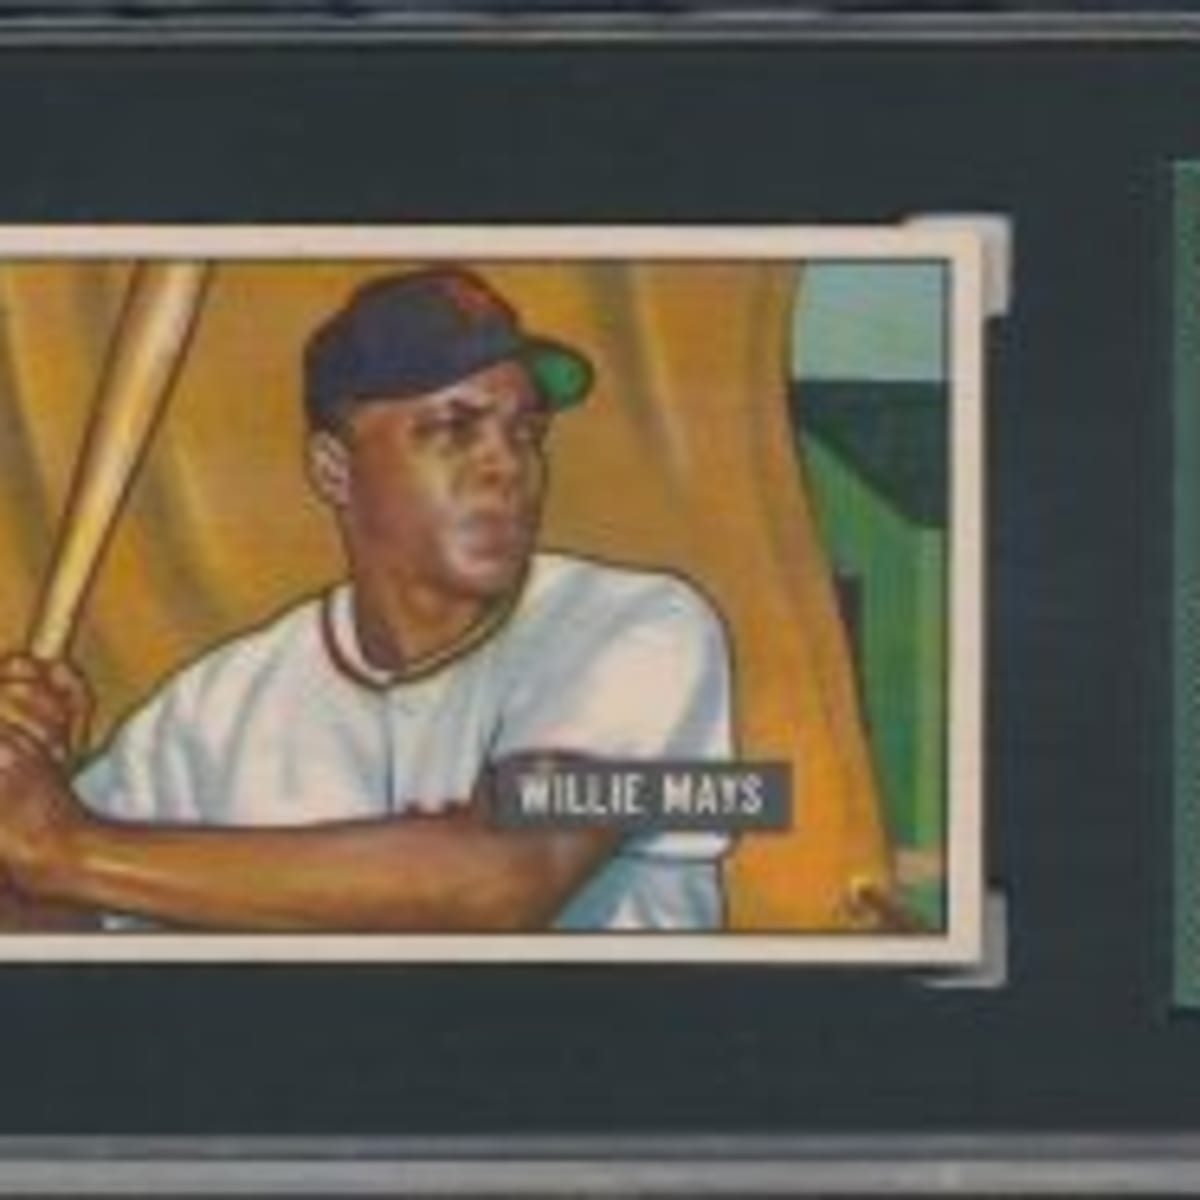 1951 Willie Mays Minneapolis Millers Jersey